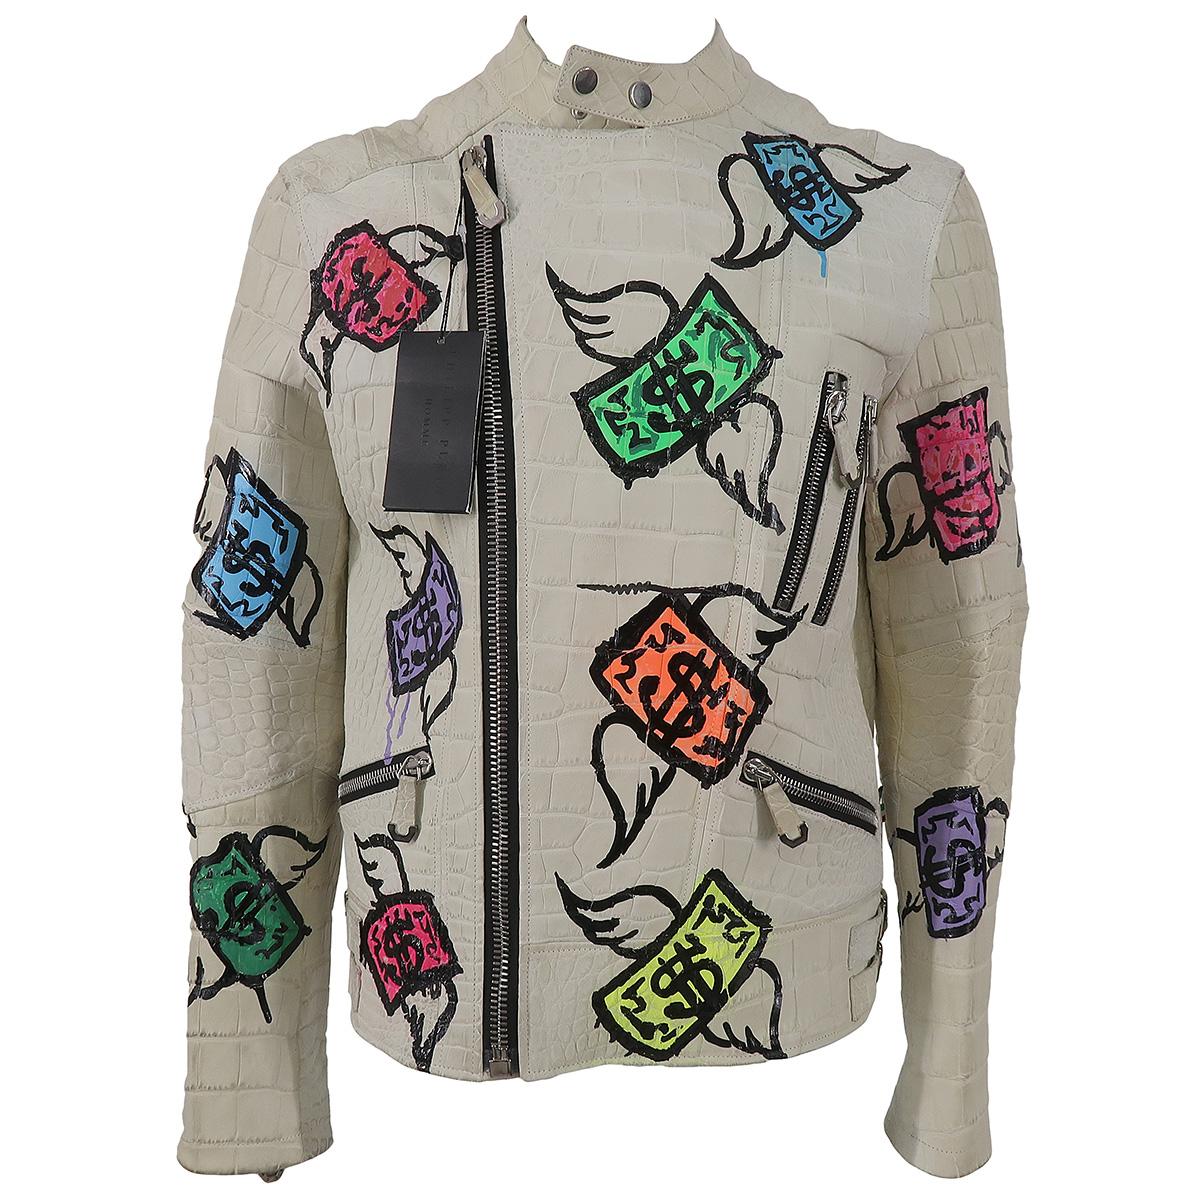 PHILIPP PLEIN Rare white crocodile motorcycle jacket speckled with colorful winged dollar bills.
As seen on Boxer Floyd Mayweather Jr. as well as on Paris Hilton Boyfriend on the memorable 
Runway Cruise 2018 that took place in Canne France on may